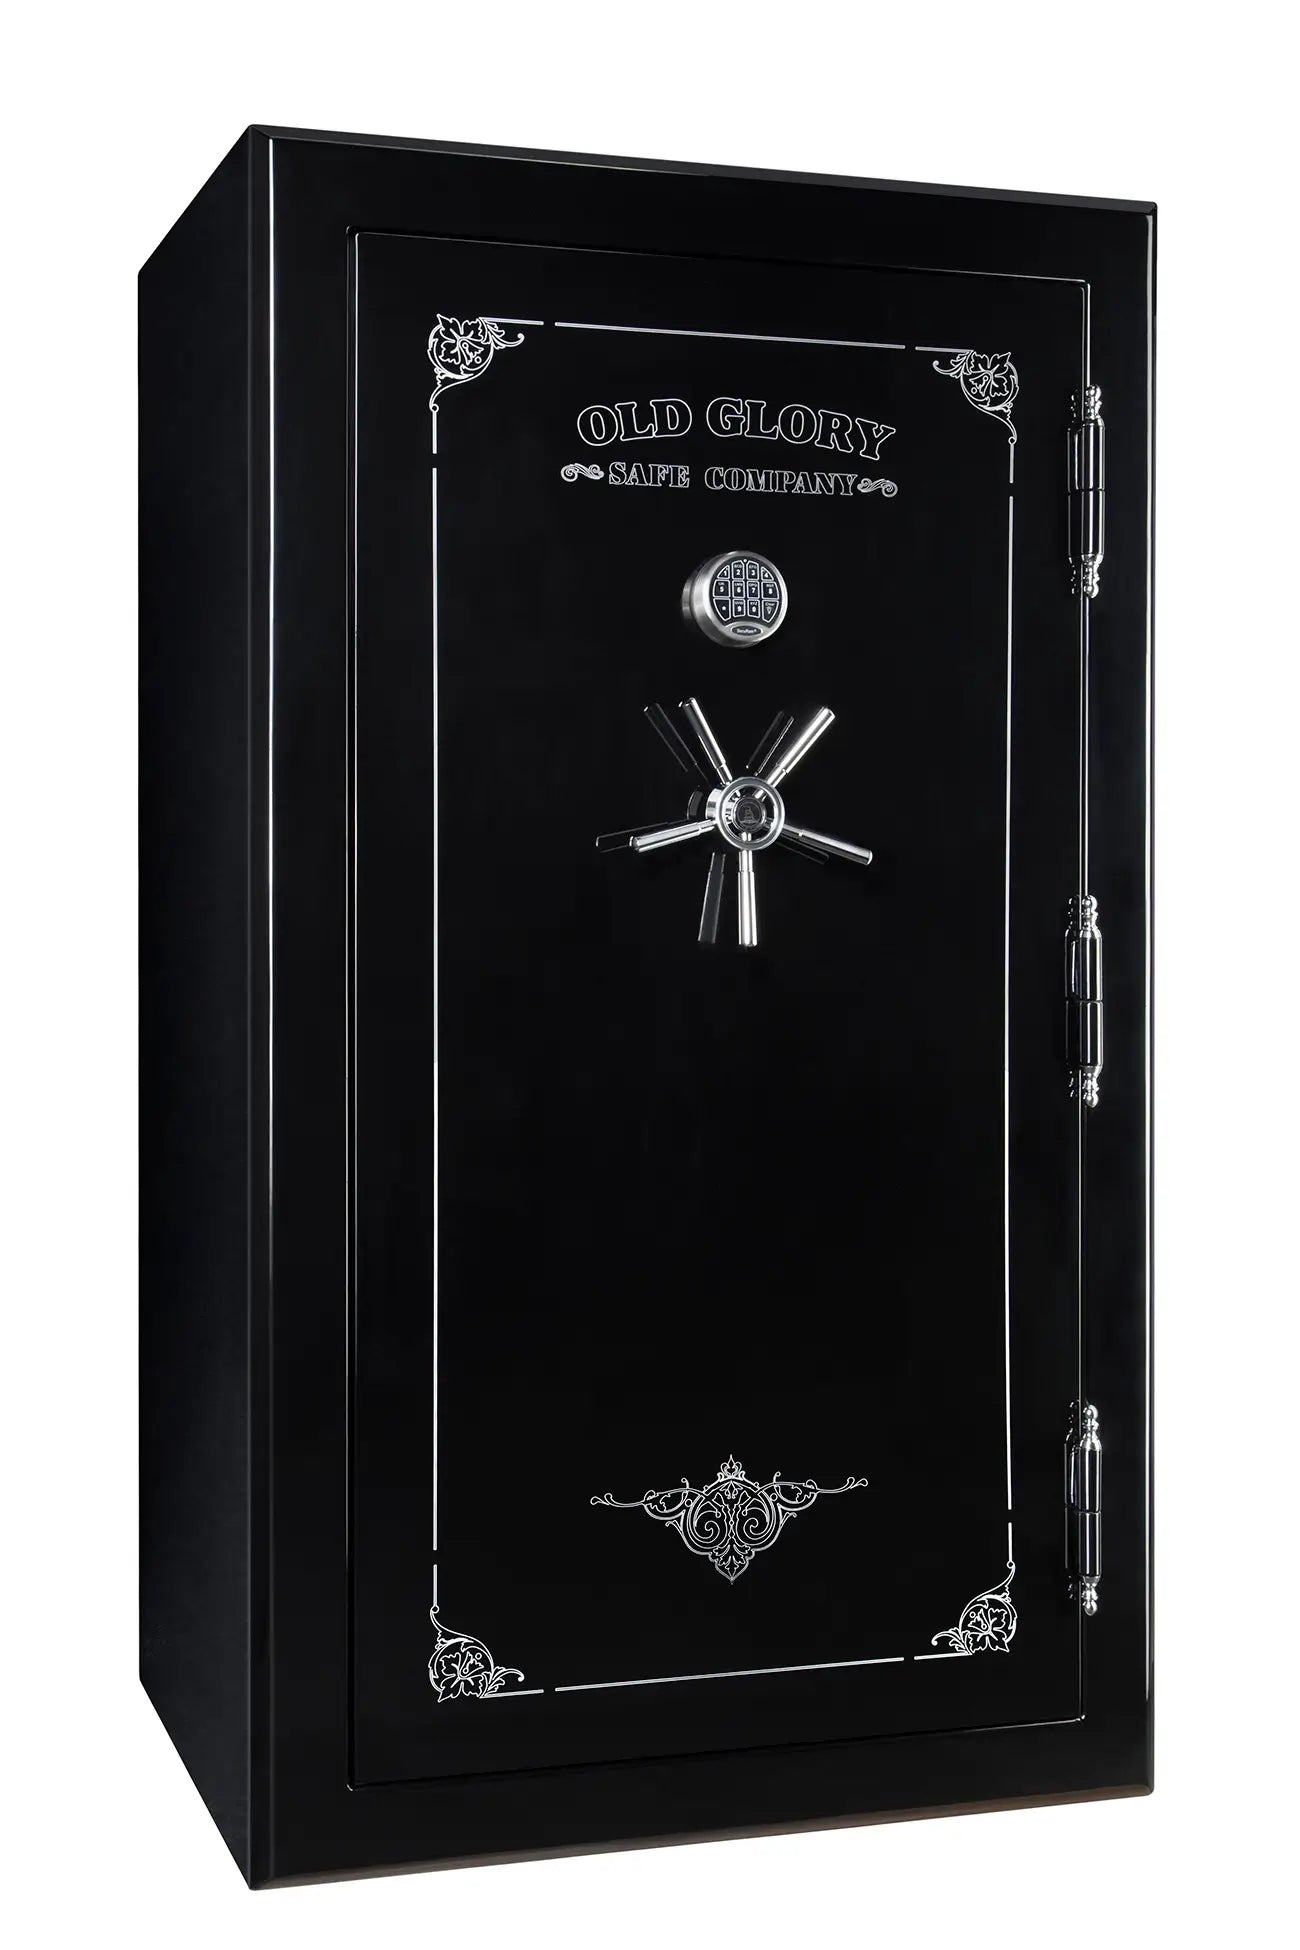 72 inch tall by 42 inch wide Old Glory Super Duty gun safe locked in gloss black